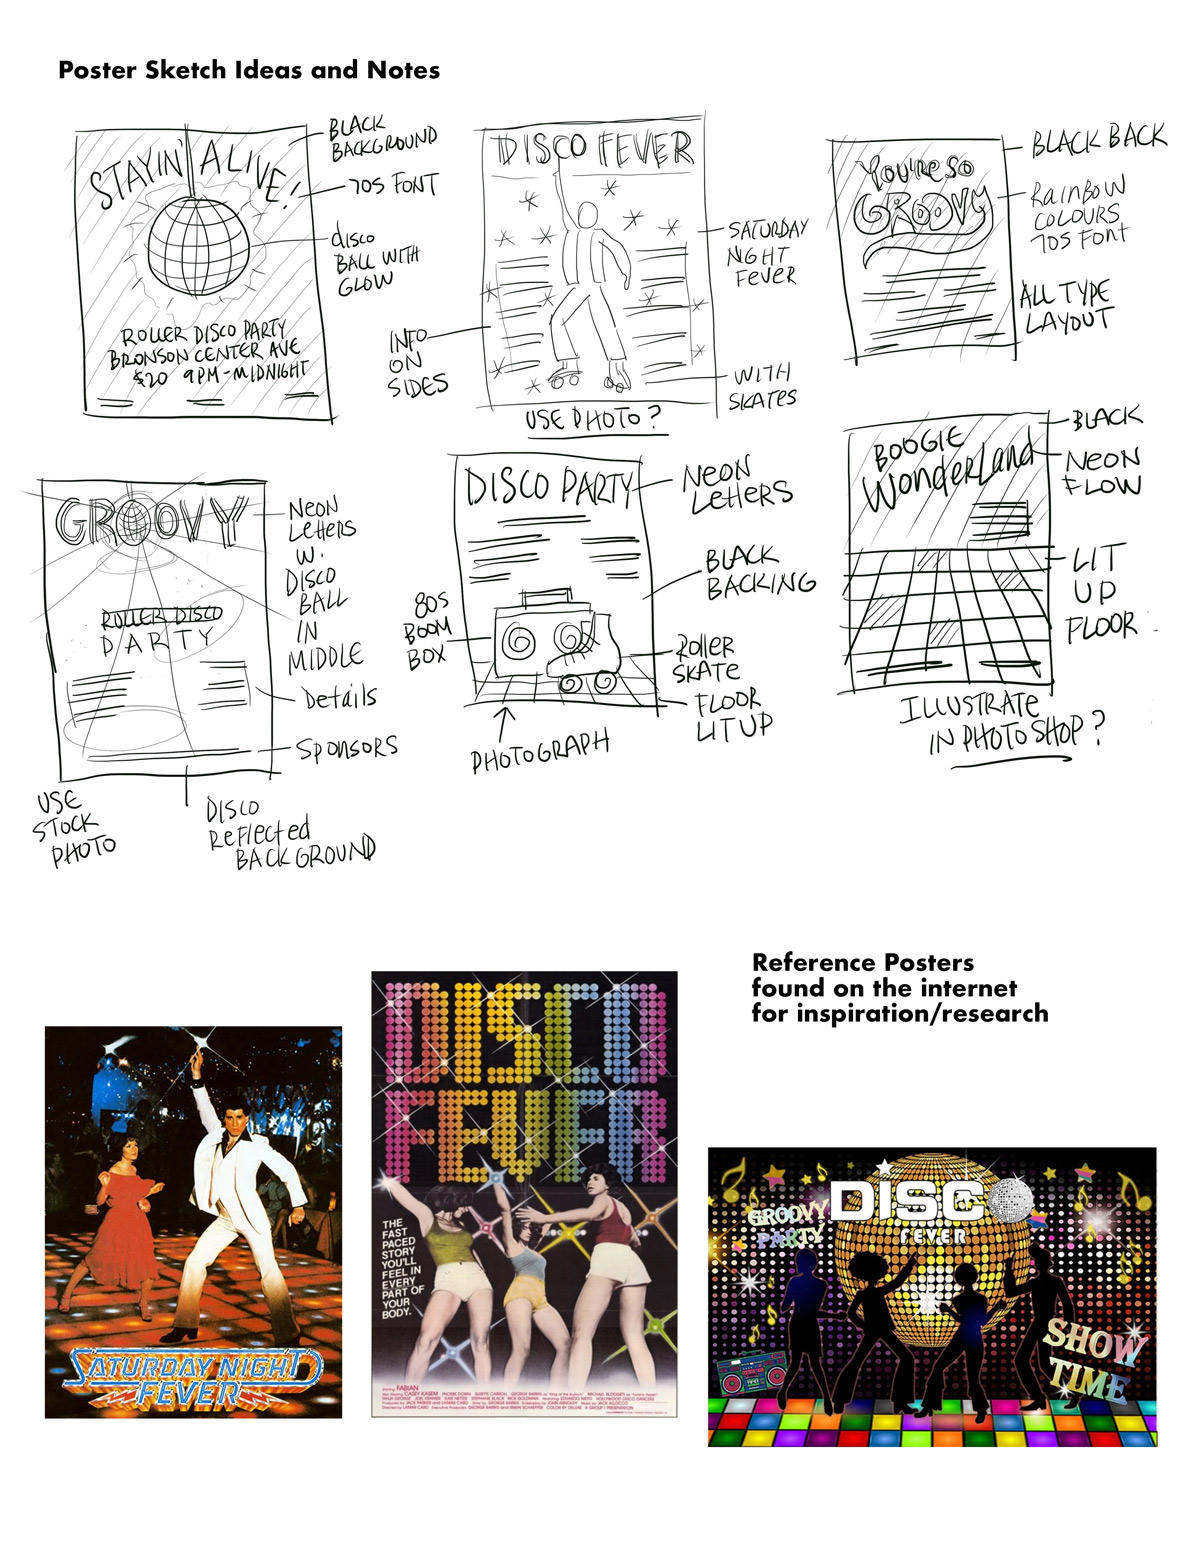 Image displaying sketch ideas and notes for poster design